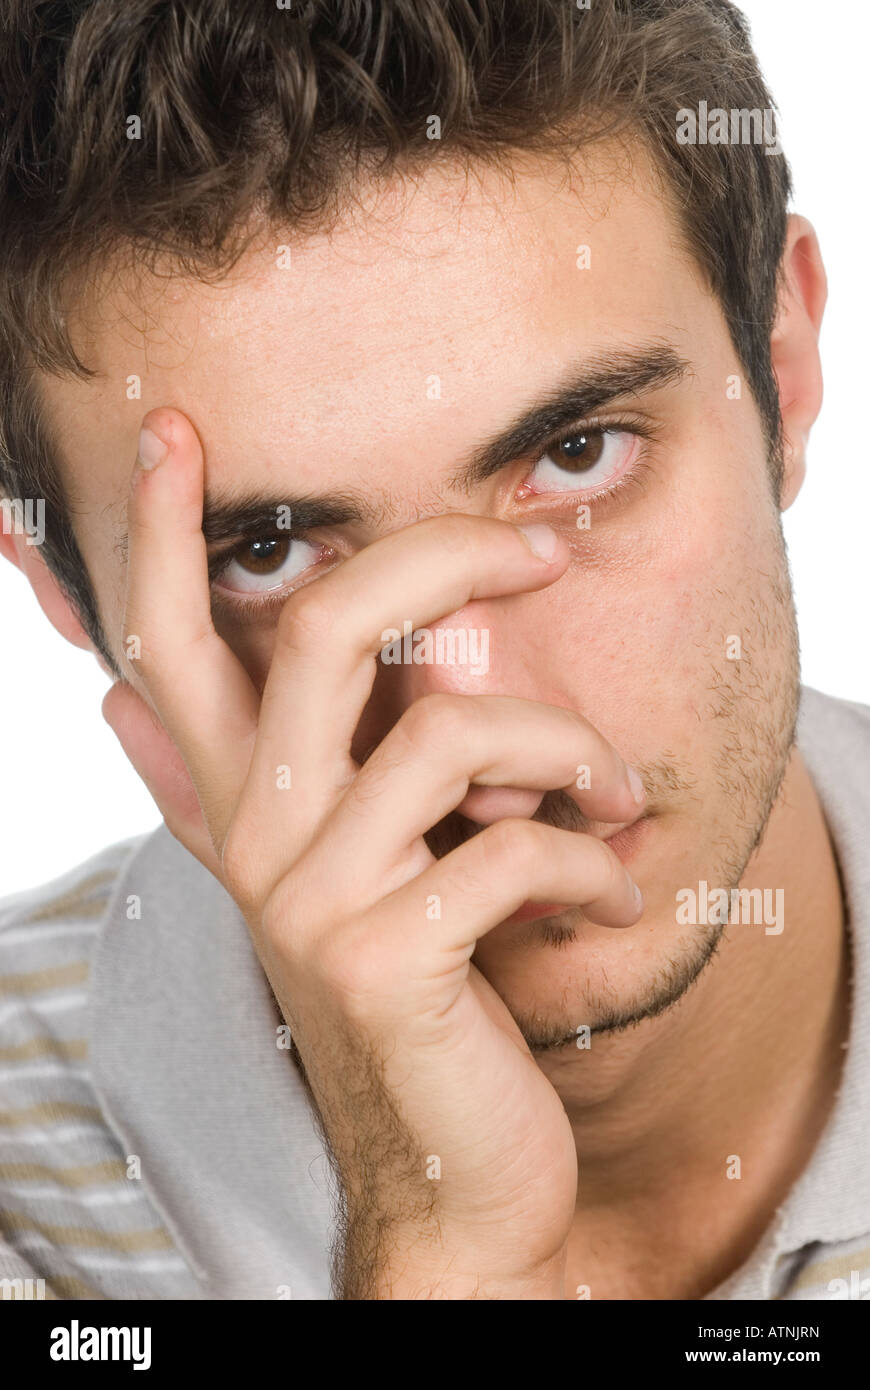 Young man hand covering face Stock Photo - Alamy